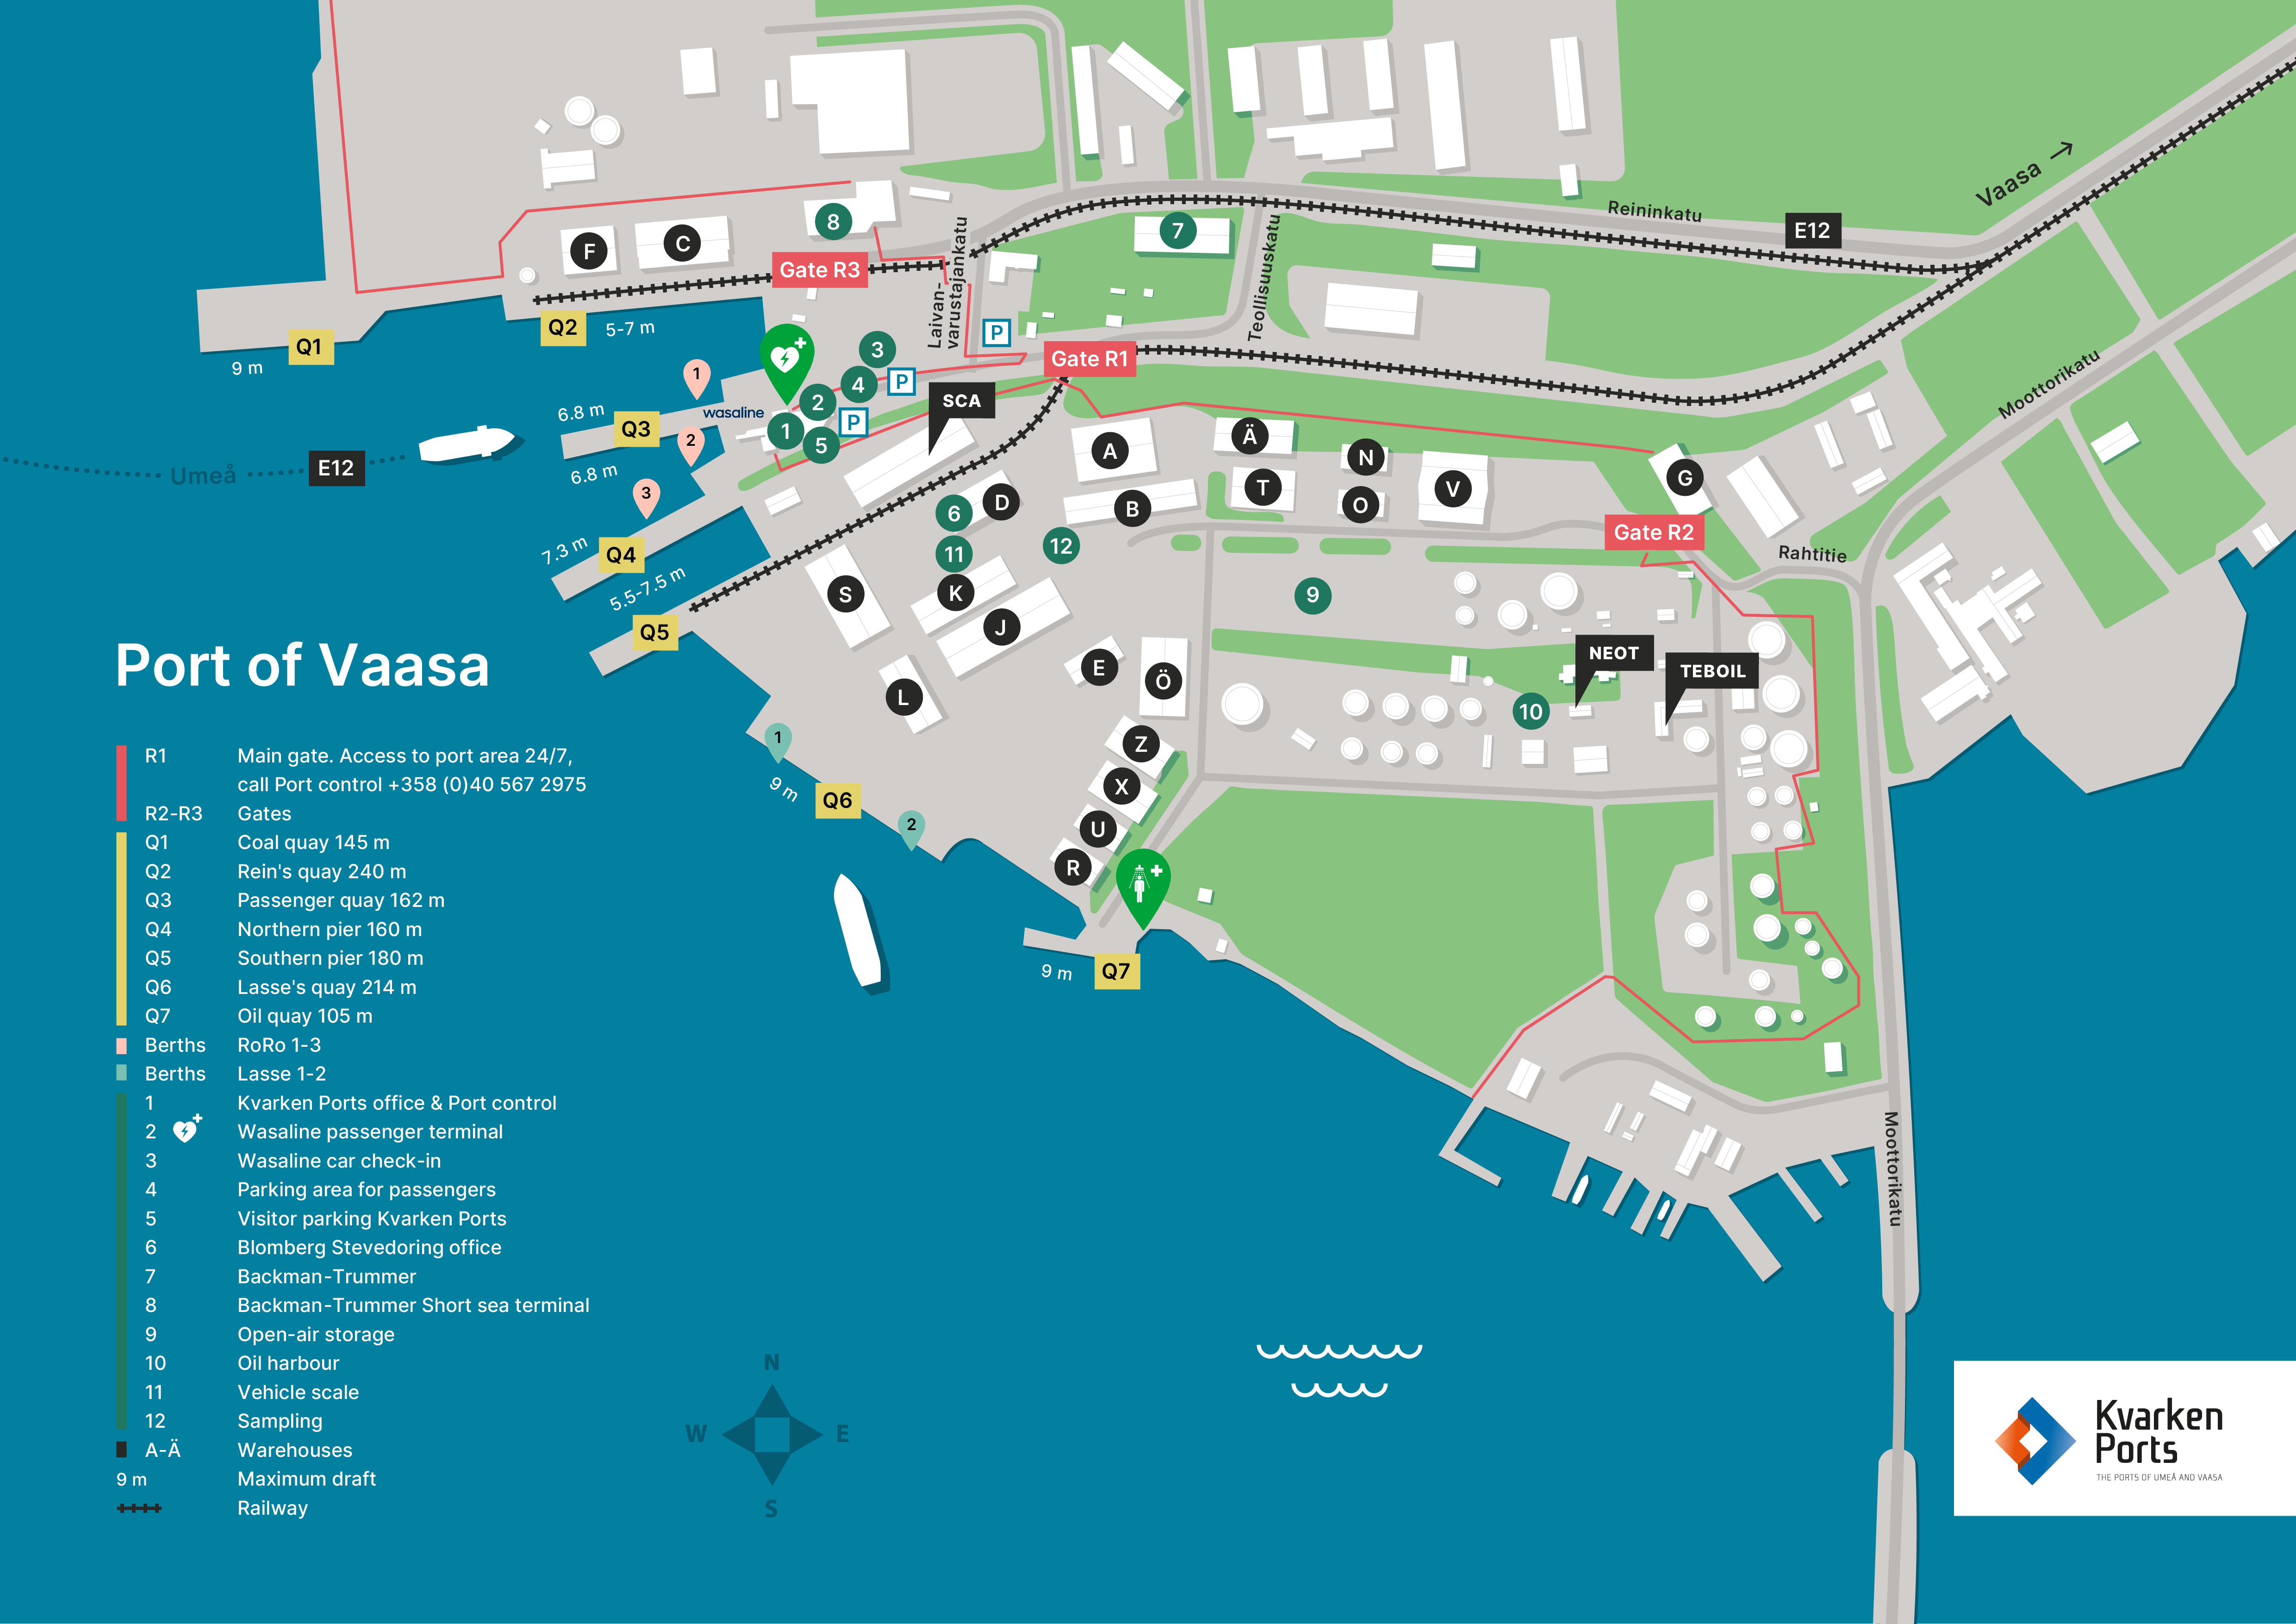 Map over the Port of Vasa